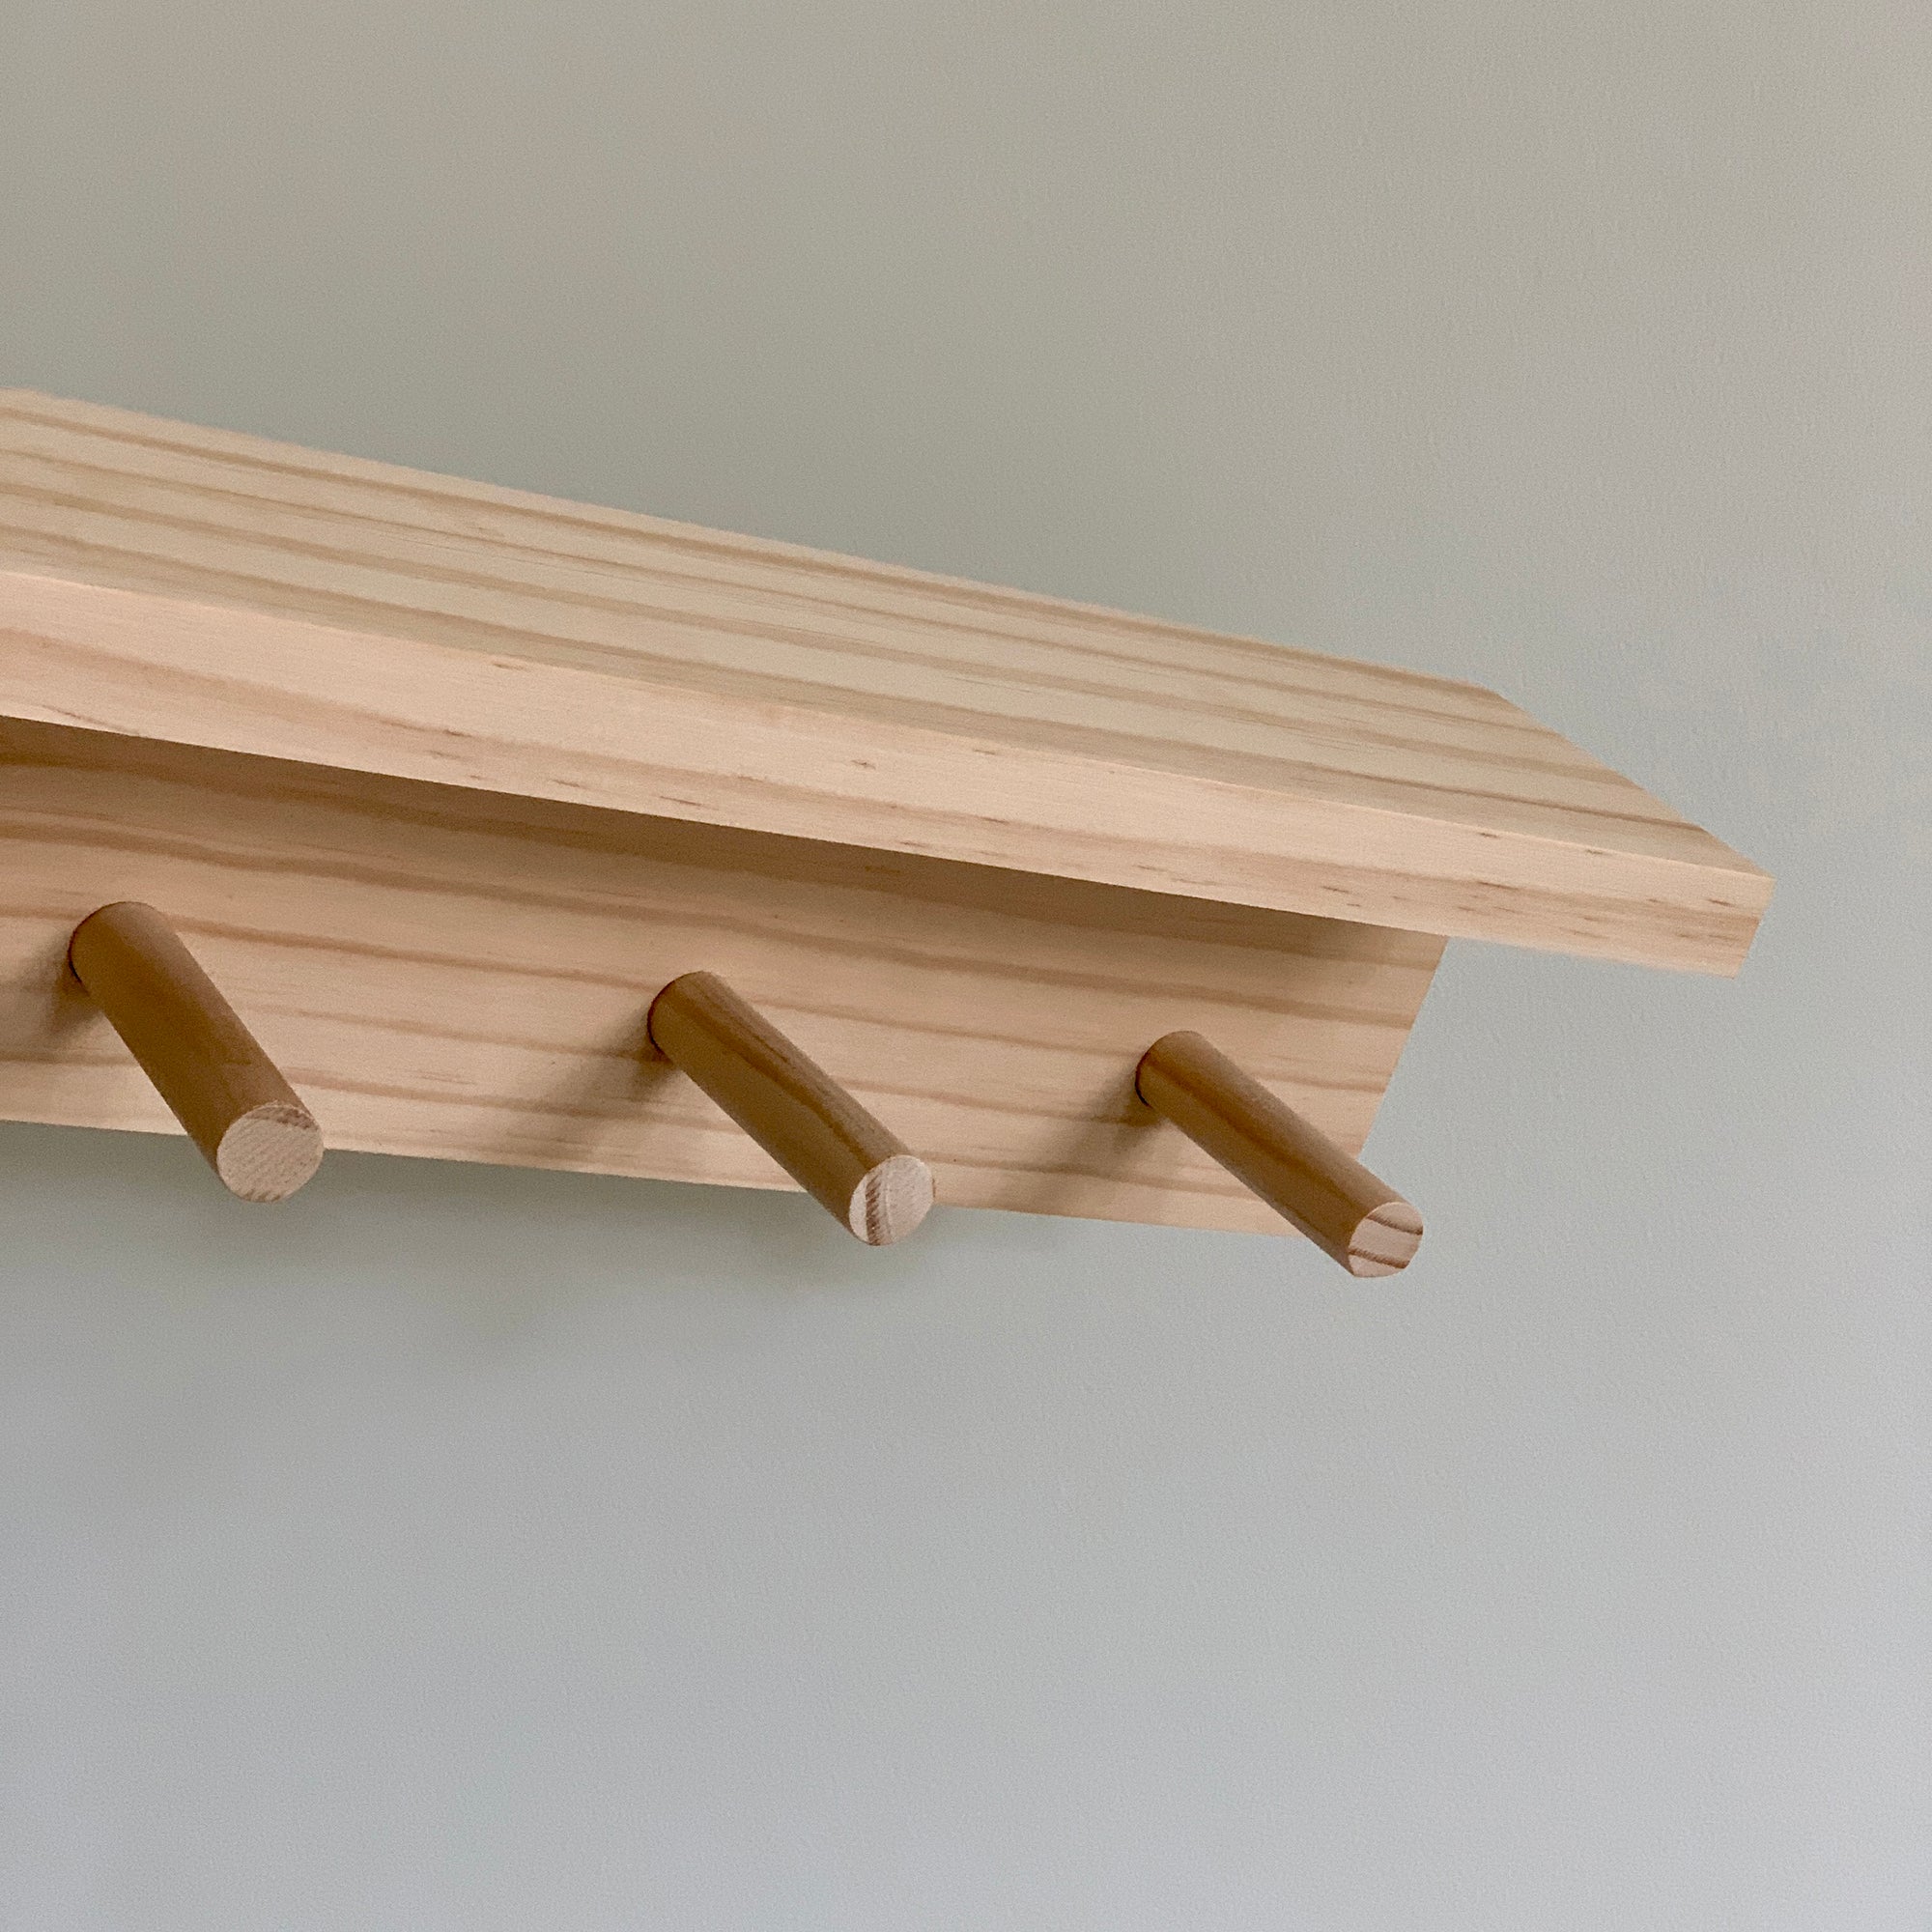 WALL RACK WITH SHELF | MADE TO ORDER